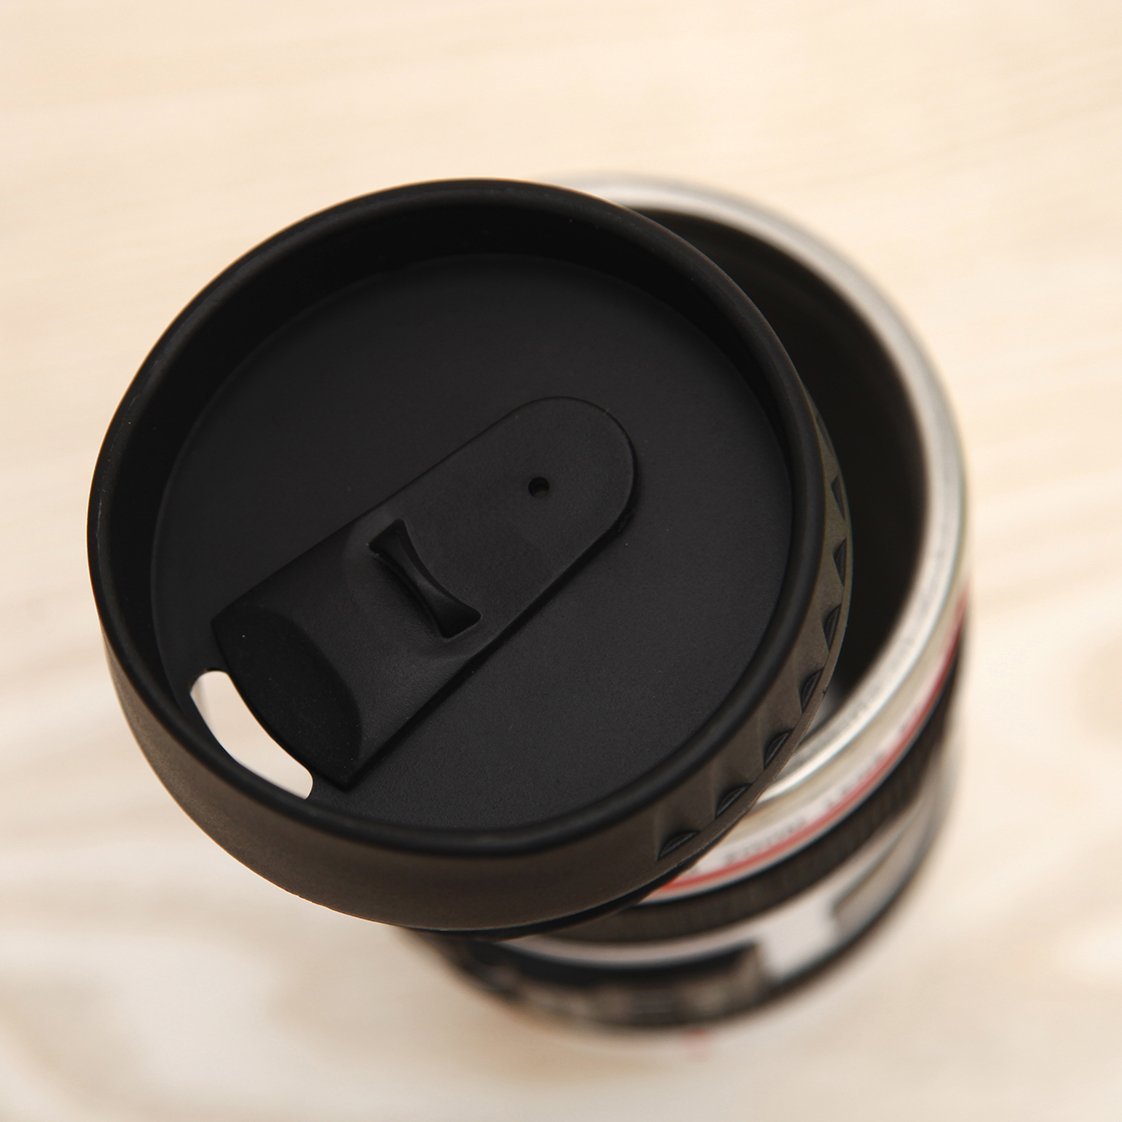 Camera Lens Travel Cup - Open